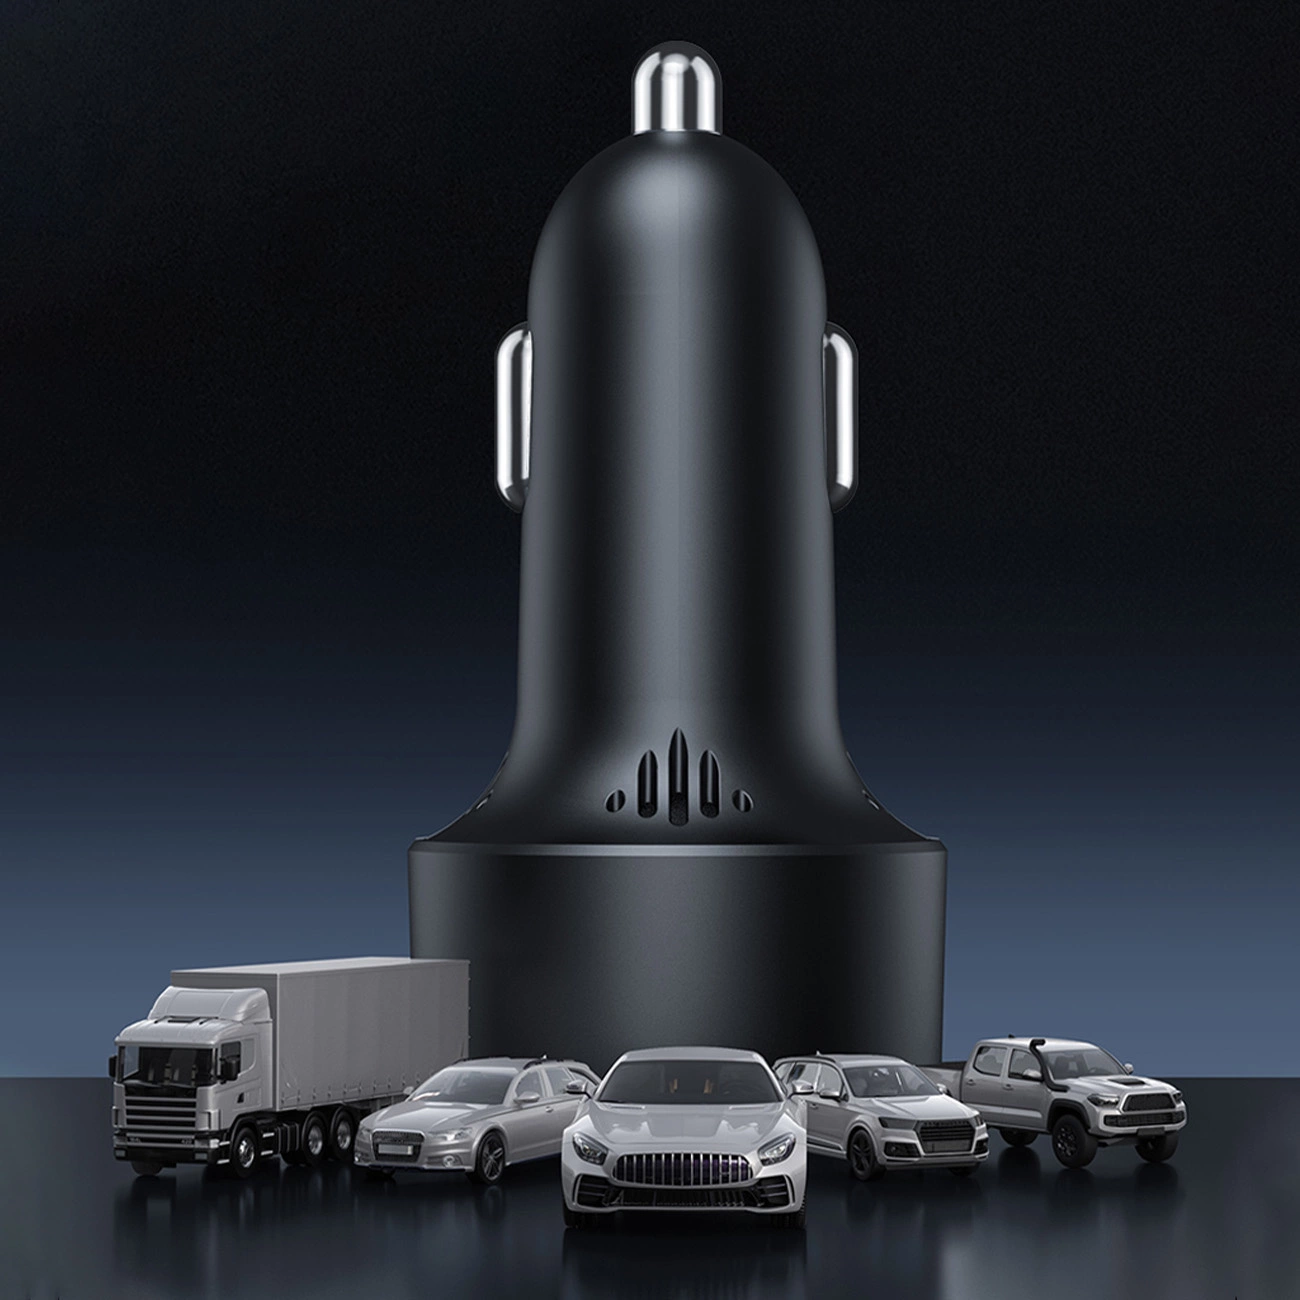 Models of various cars against the background of the Baseus High Efficiency Pro adapter